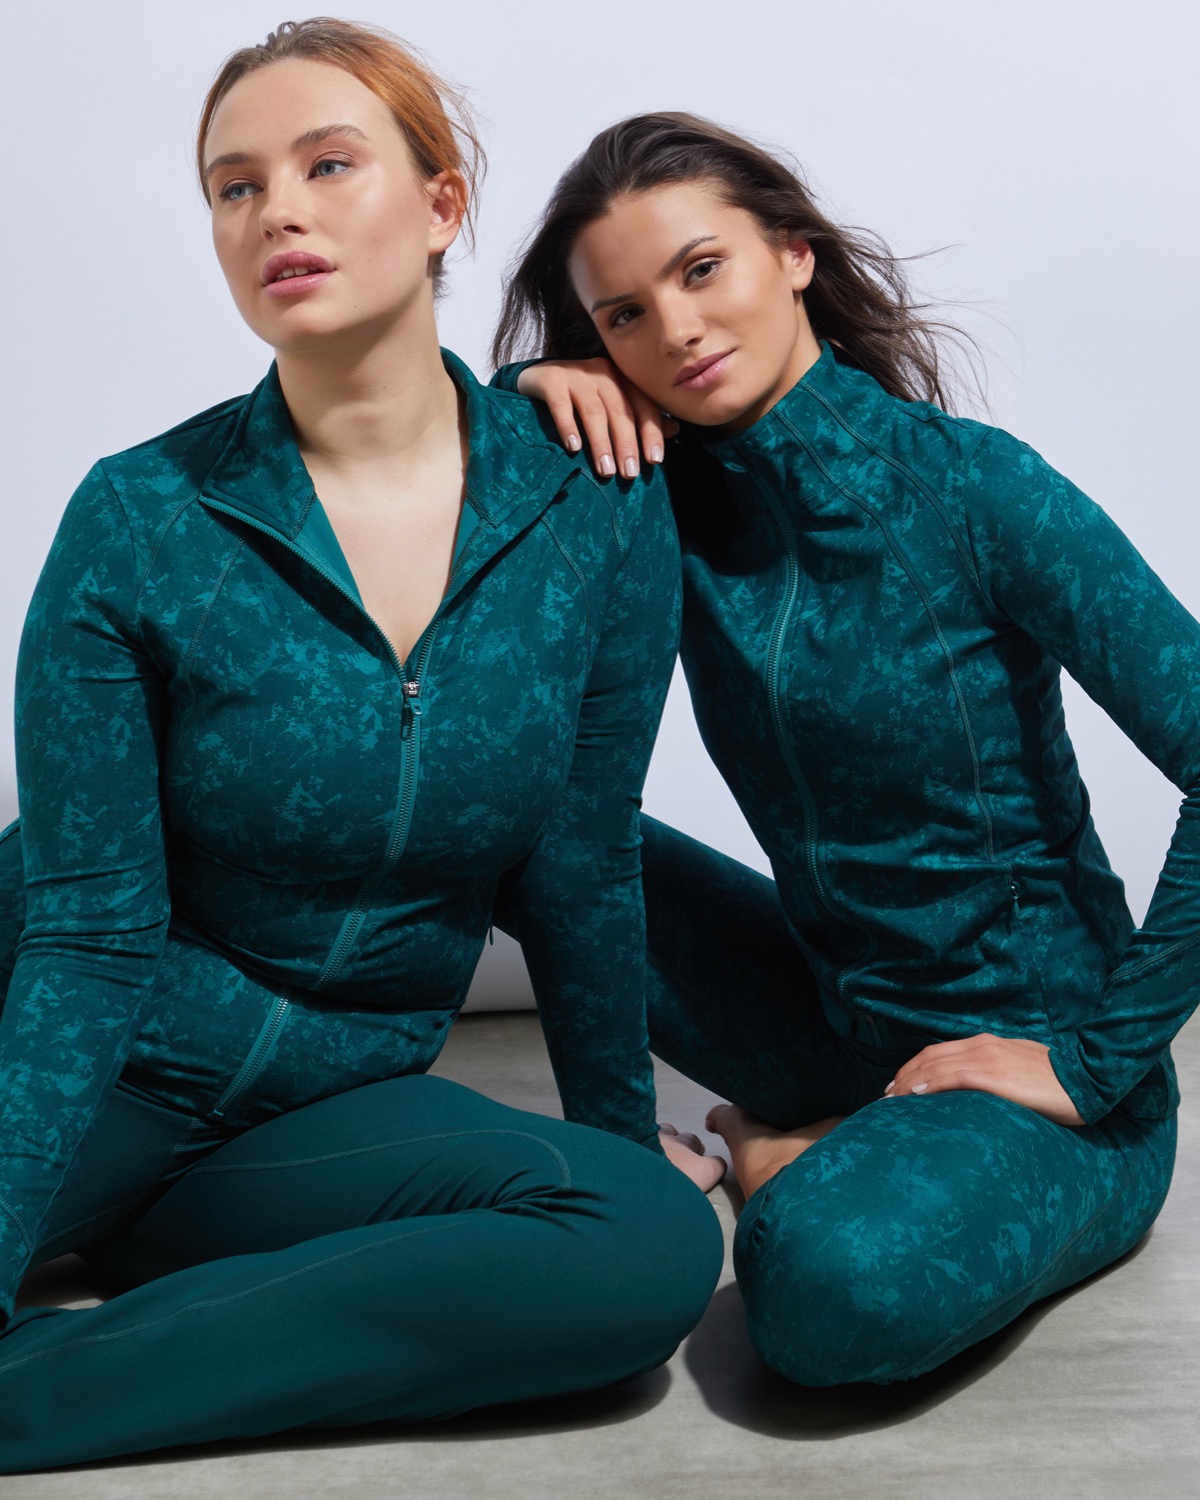 https://dunnes.btxmedia.com/pws/client/images/catalogue/products/9631161/zoom/9631161_print.jpg